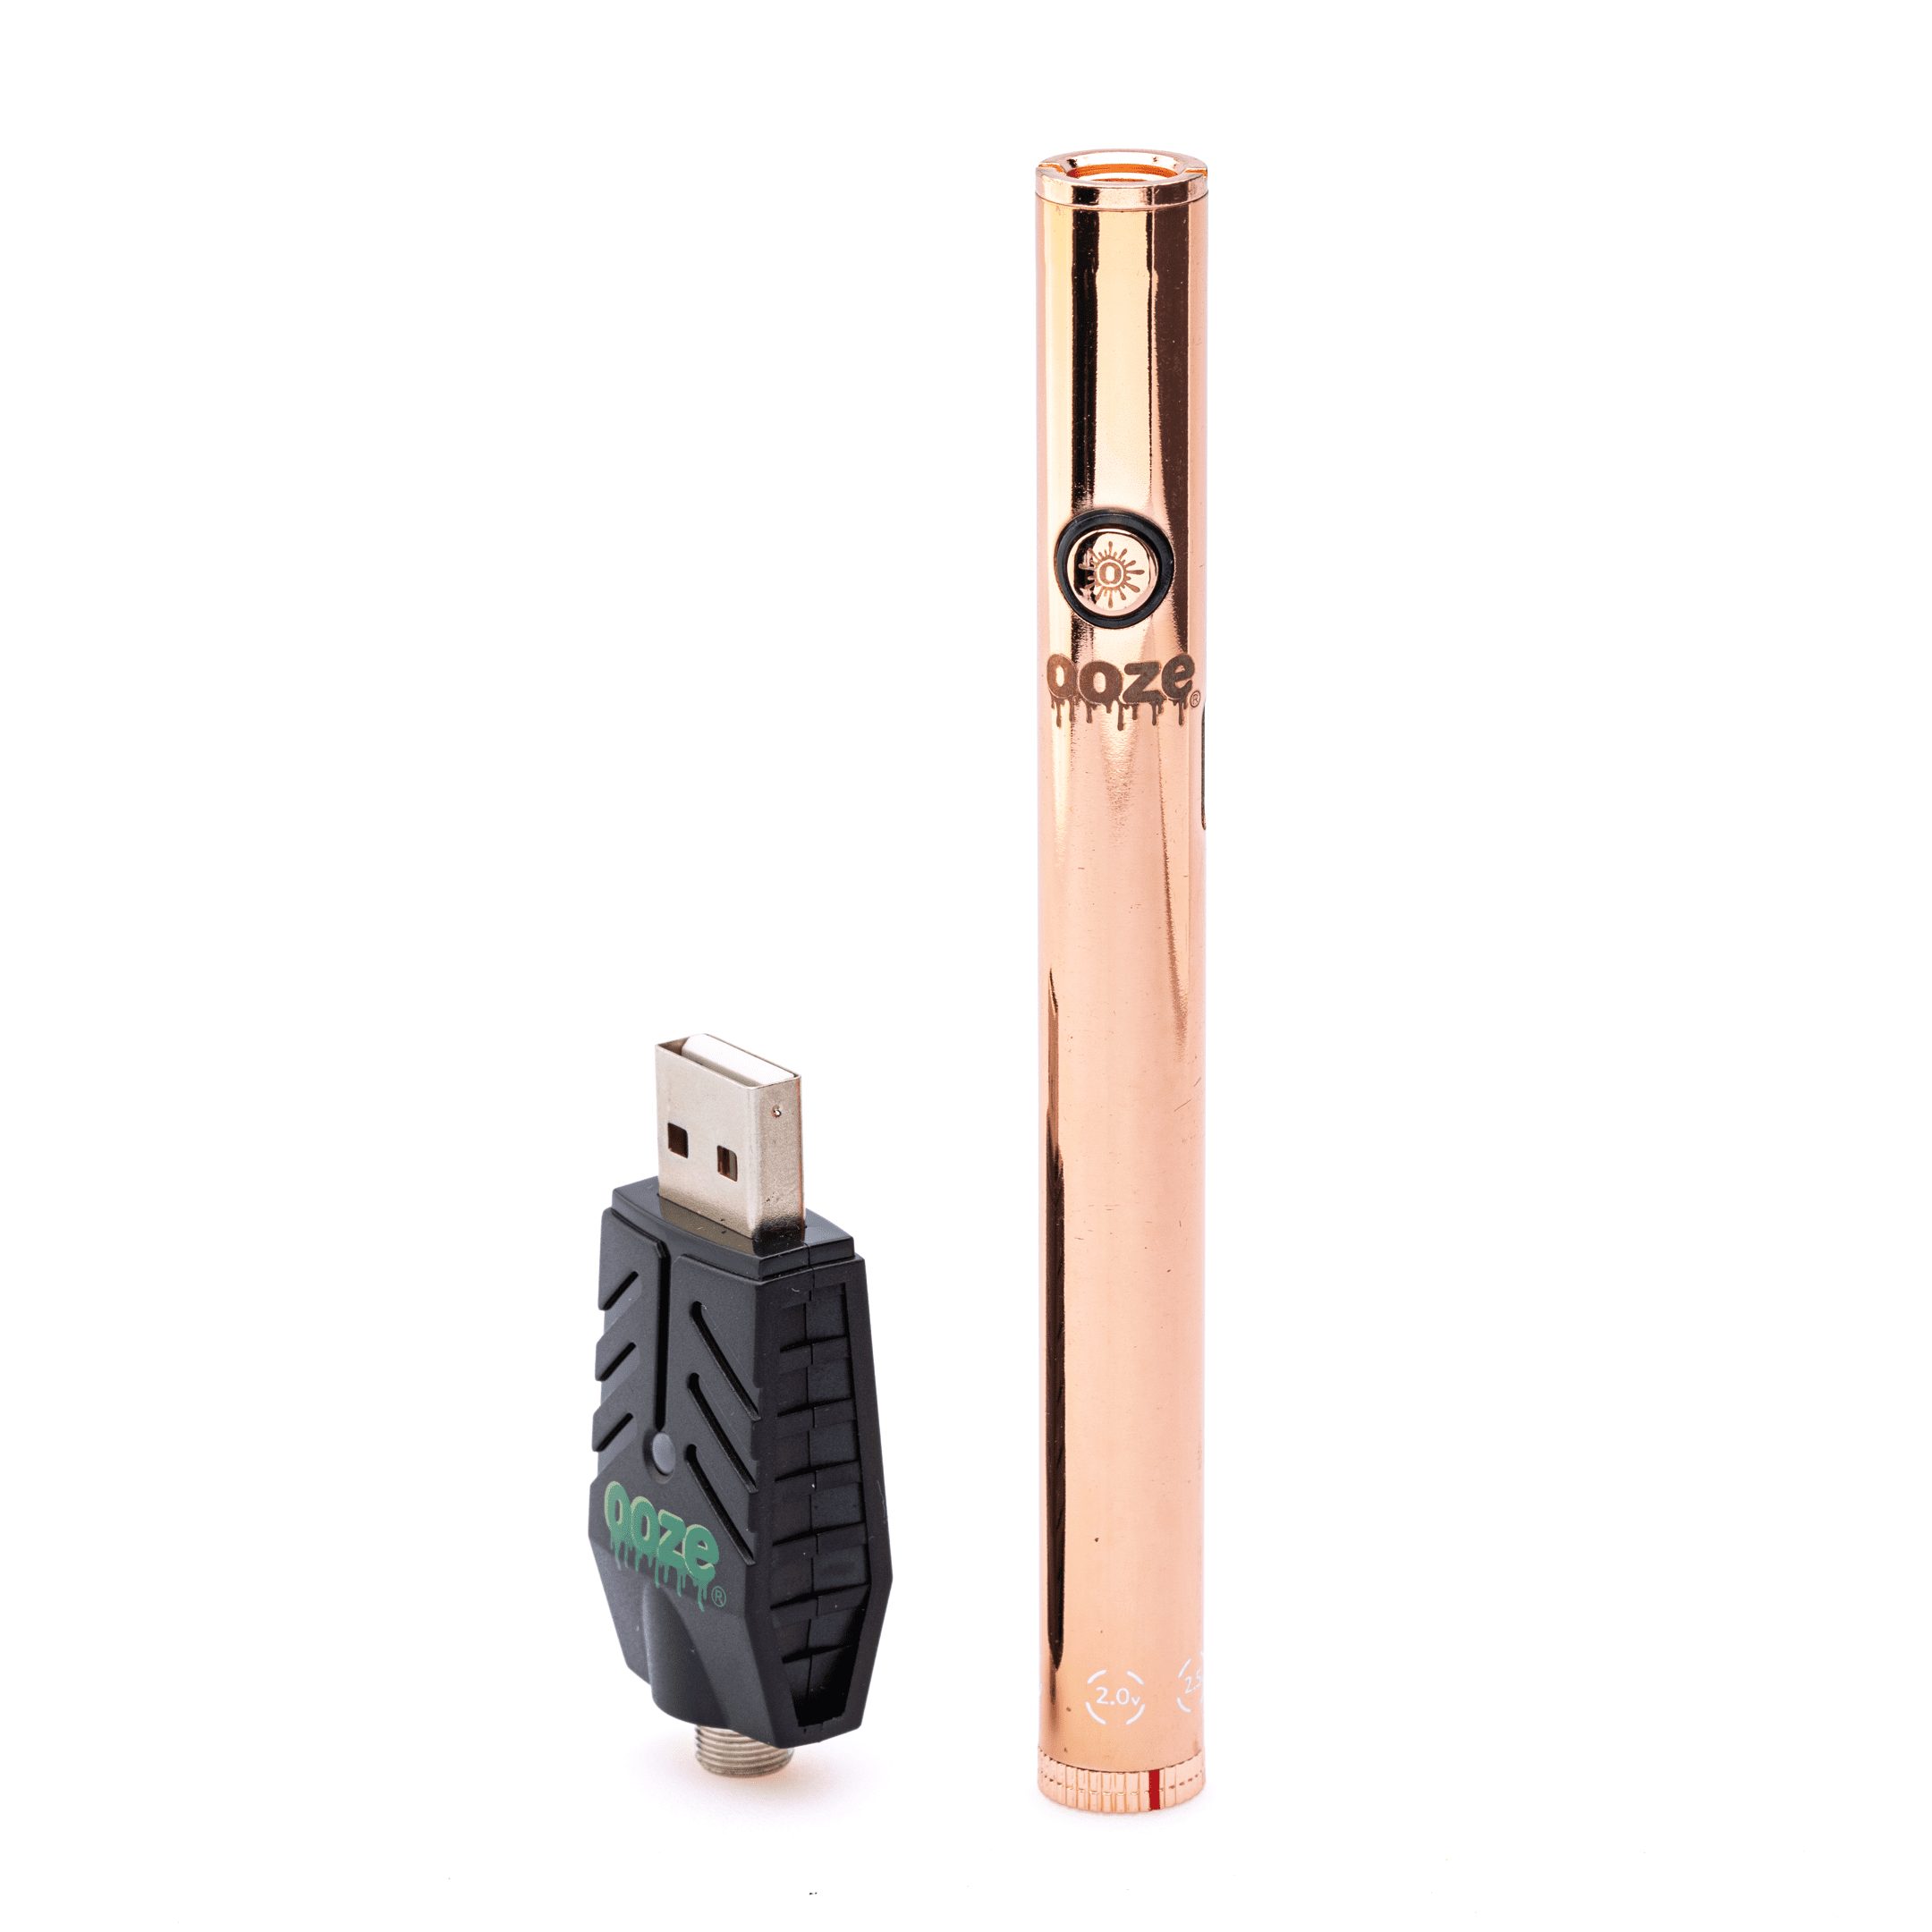 Ooze Twist Series - mAh Pen Battery - No Charger – Gold